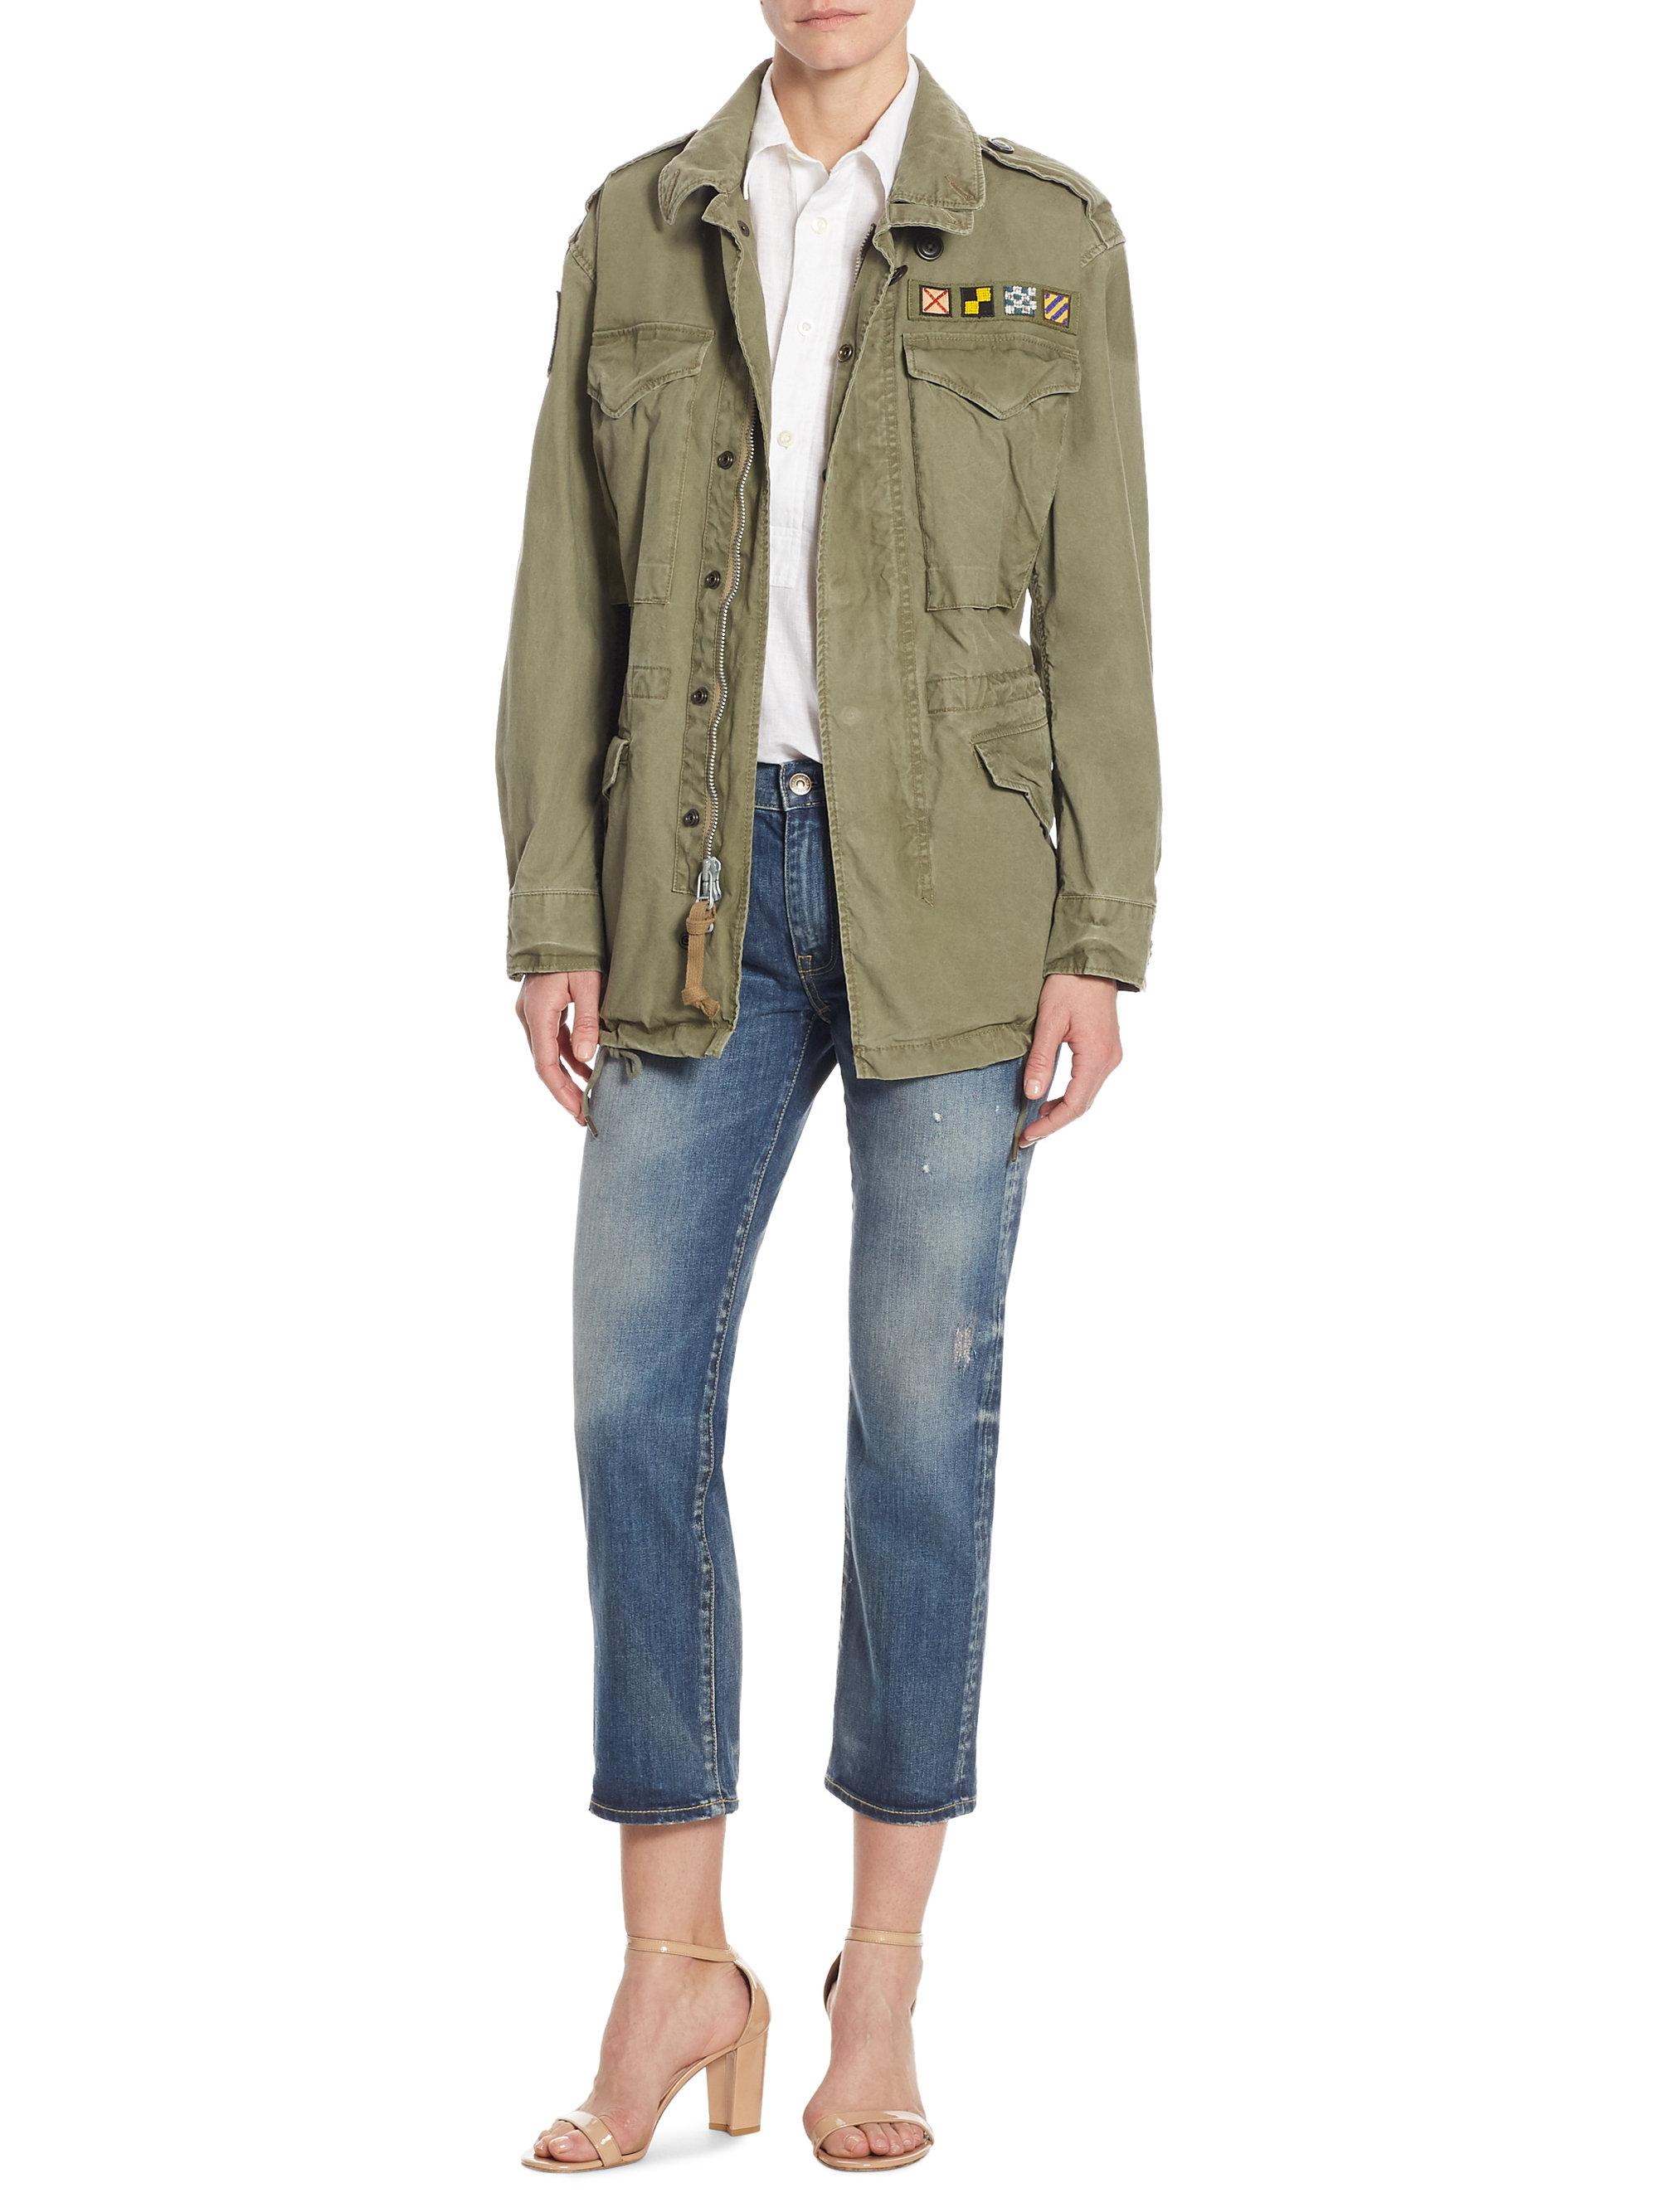 Polo Ralph Lauren Army Jacket - Army Military